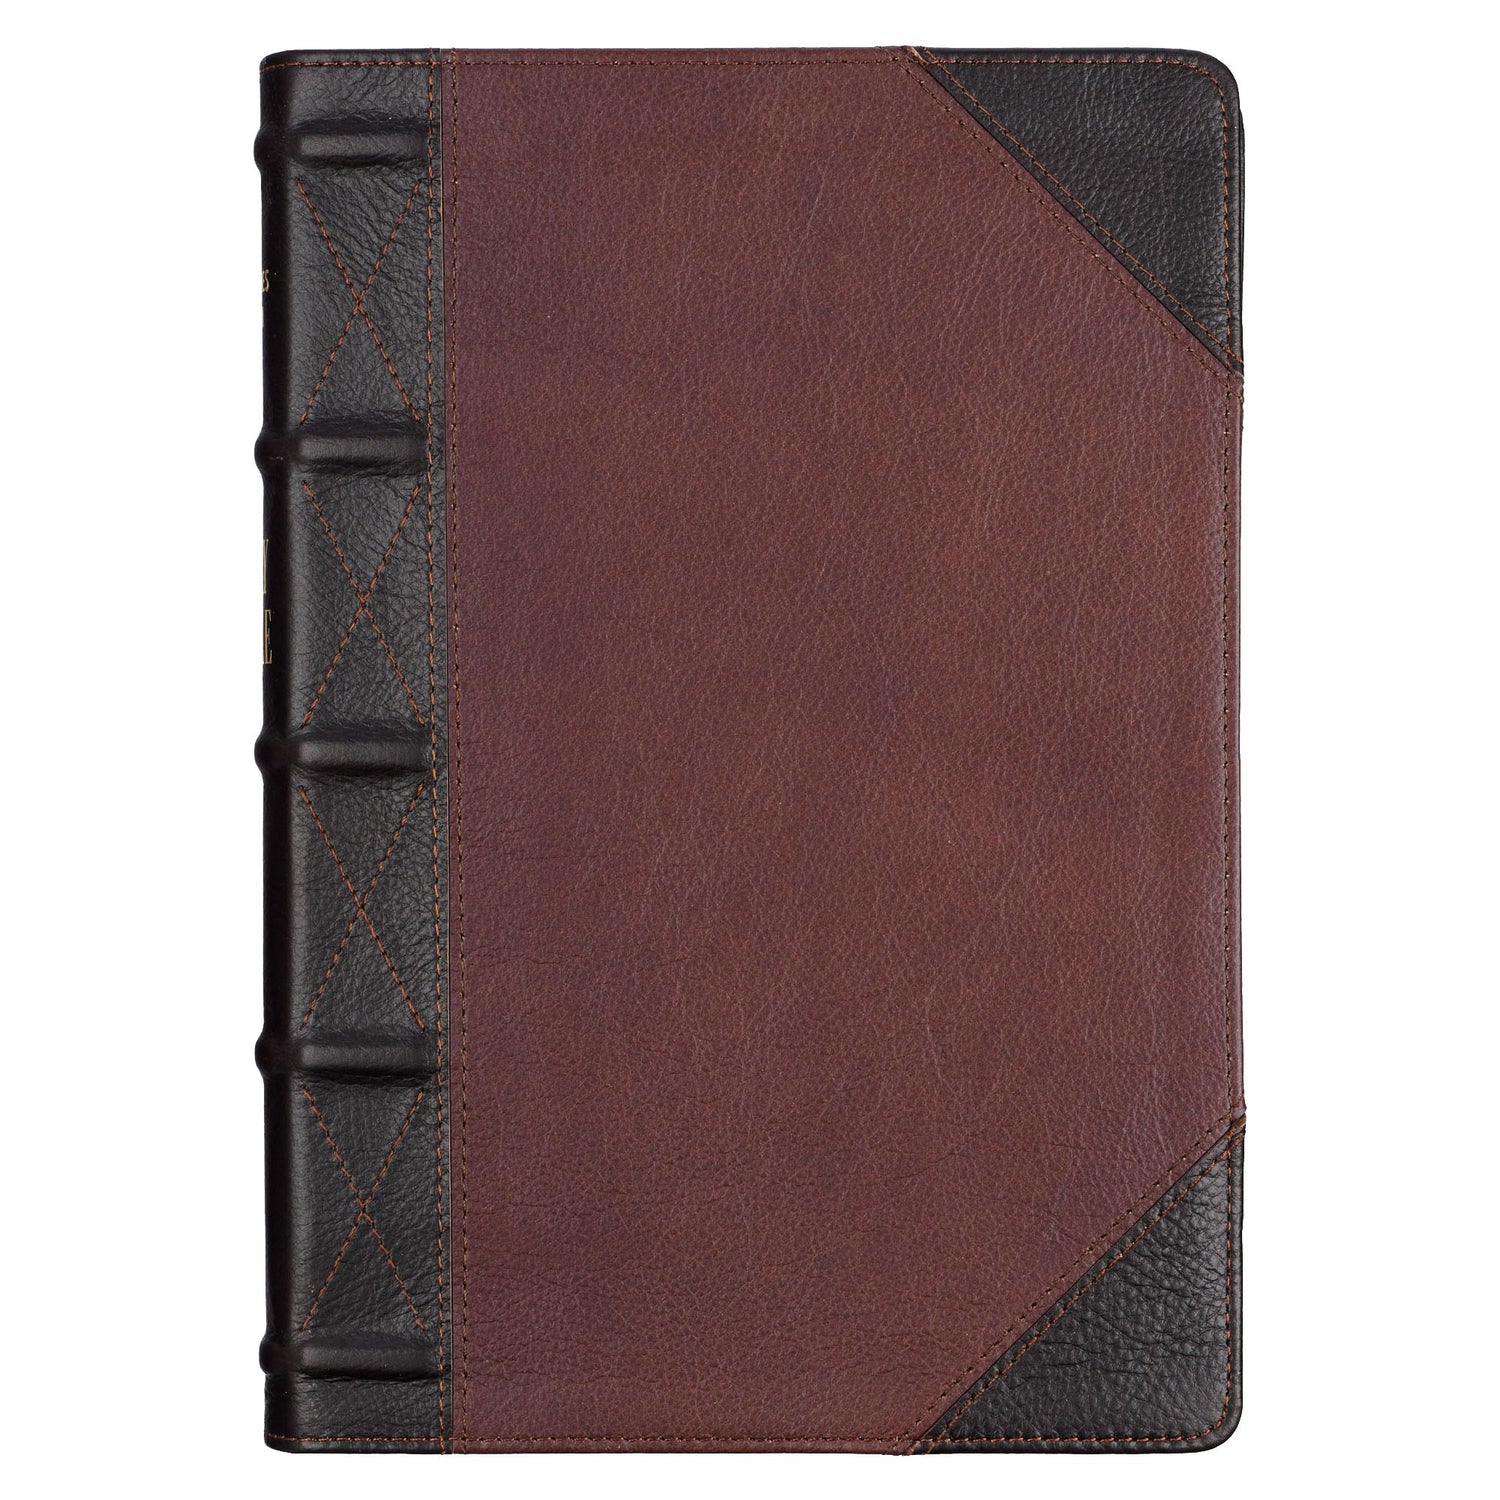 Seed of Abraham Christian Bookstore - (In)Courage - KJV Giant Print Full Size Bible-Tawny/Dark Brown Genuine Leather Indexed